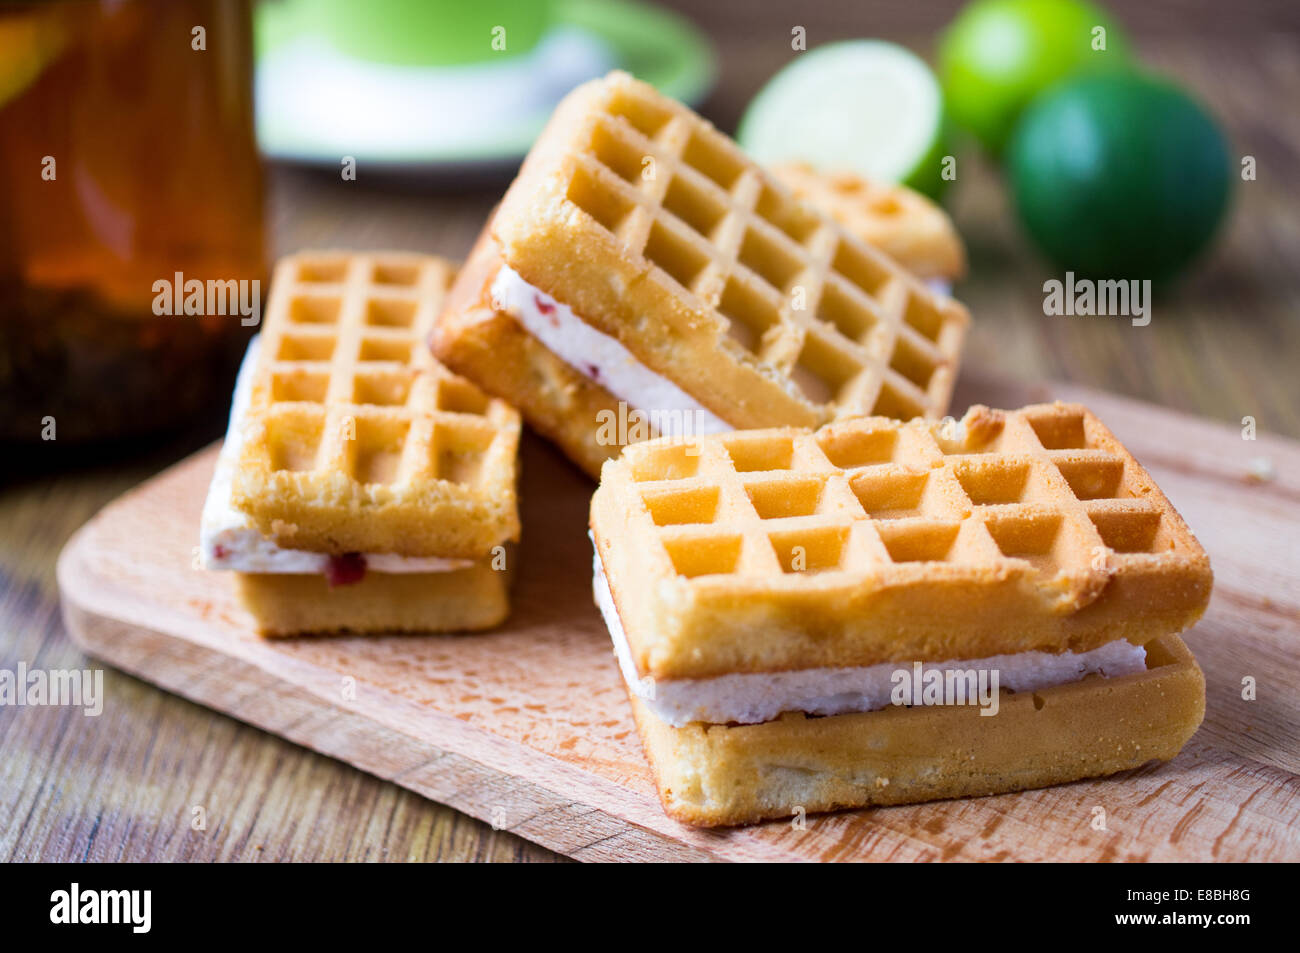 Waffles souffle stuffing. On the table lime and tea. Stock Photo